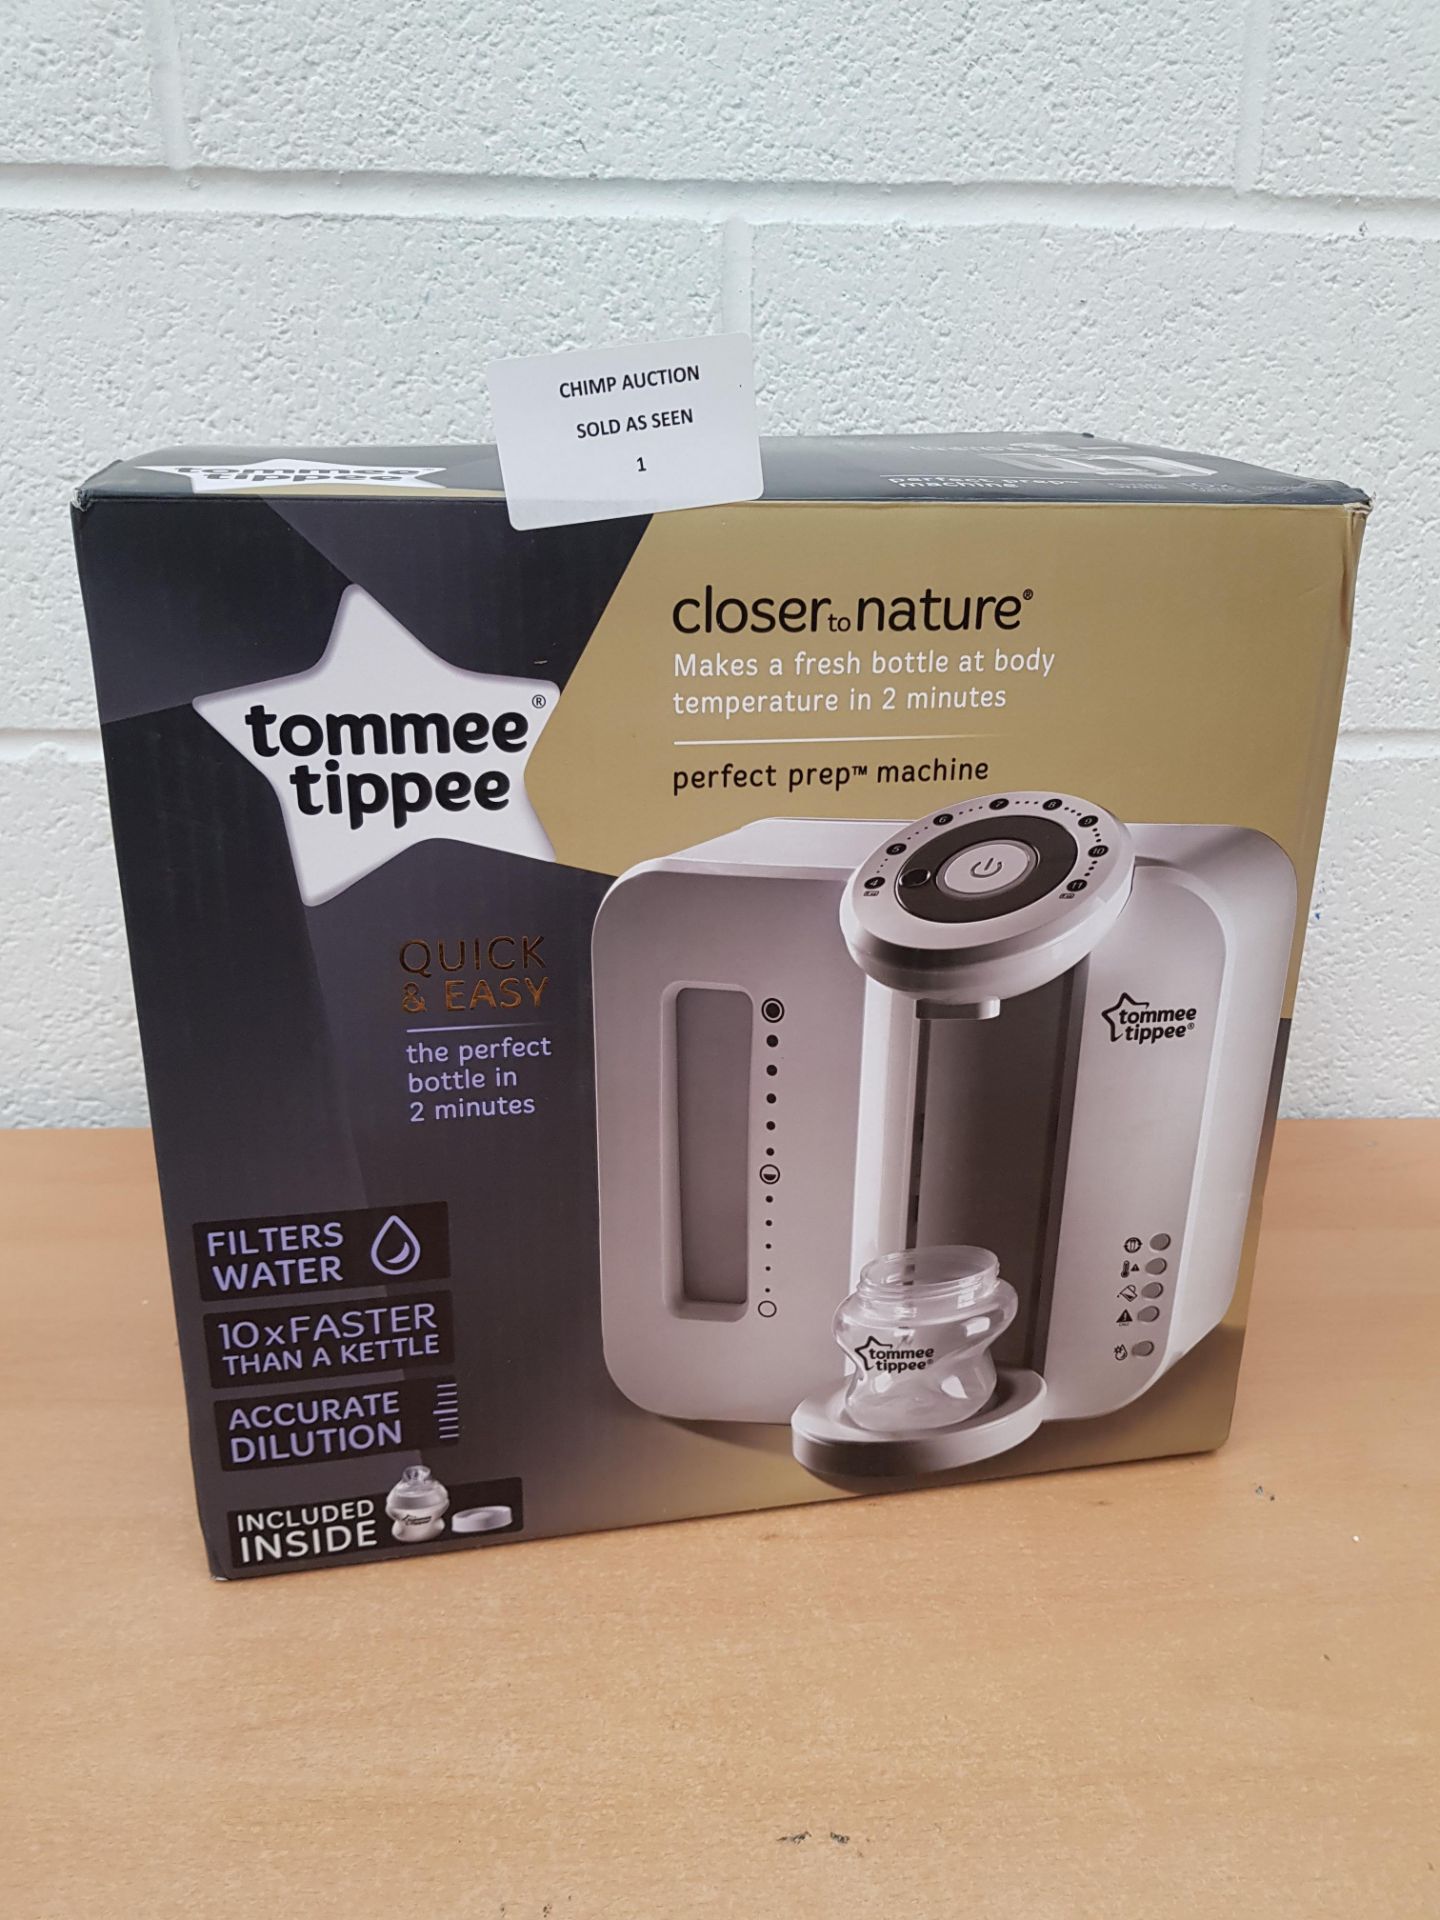 Tommee Tippee Perfect Prep Machine RRP £129.99.